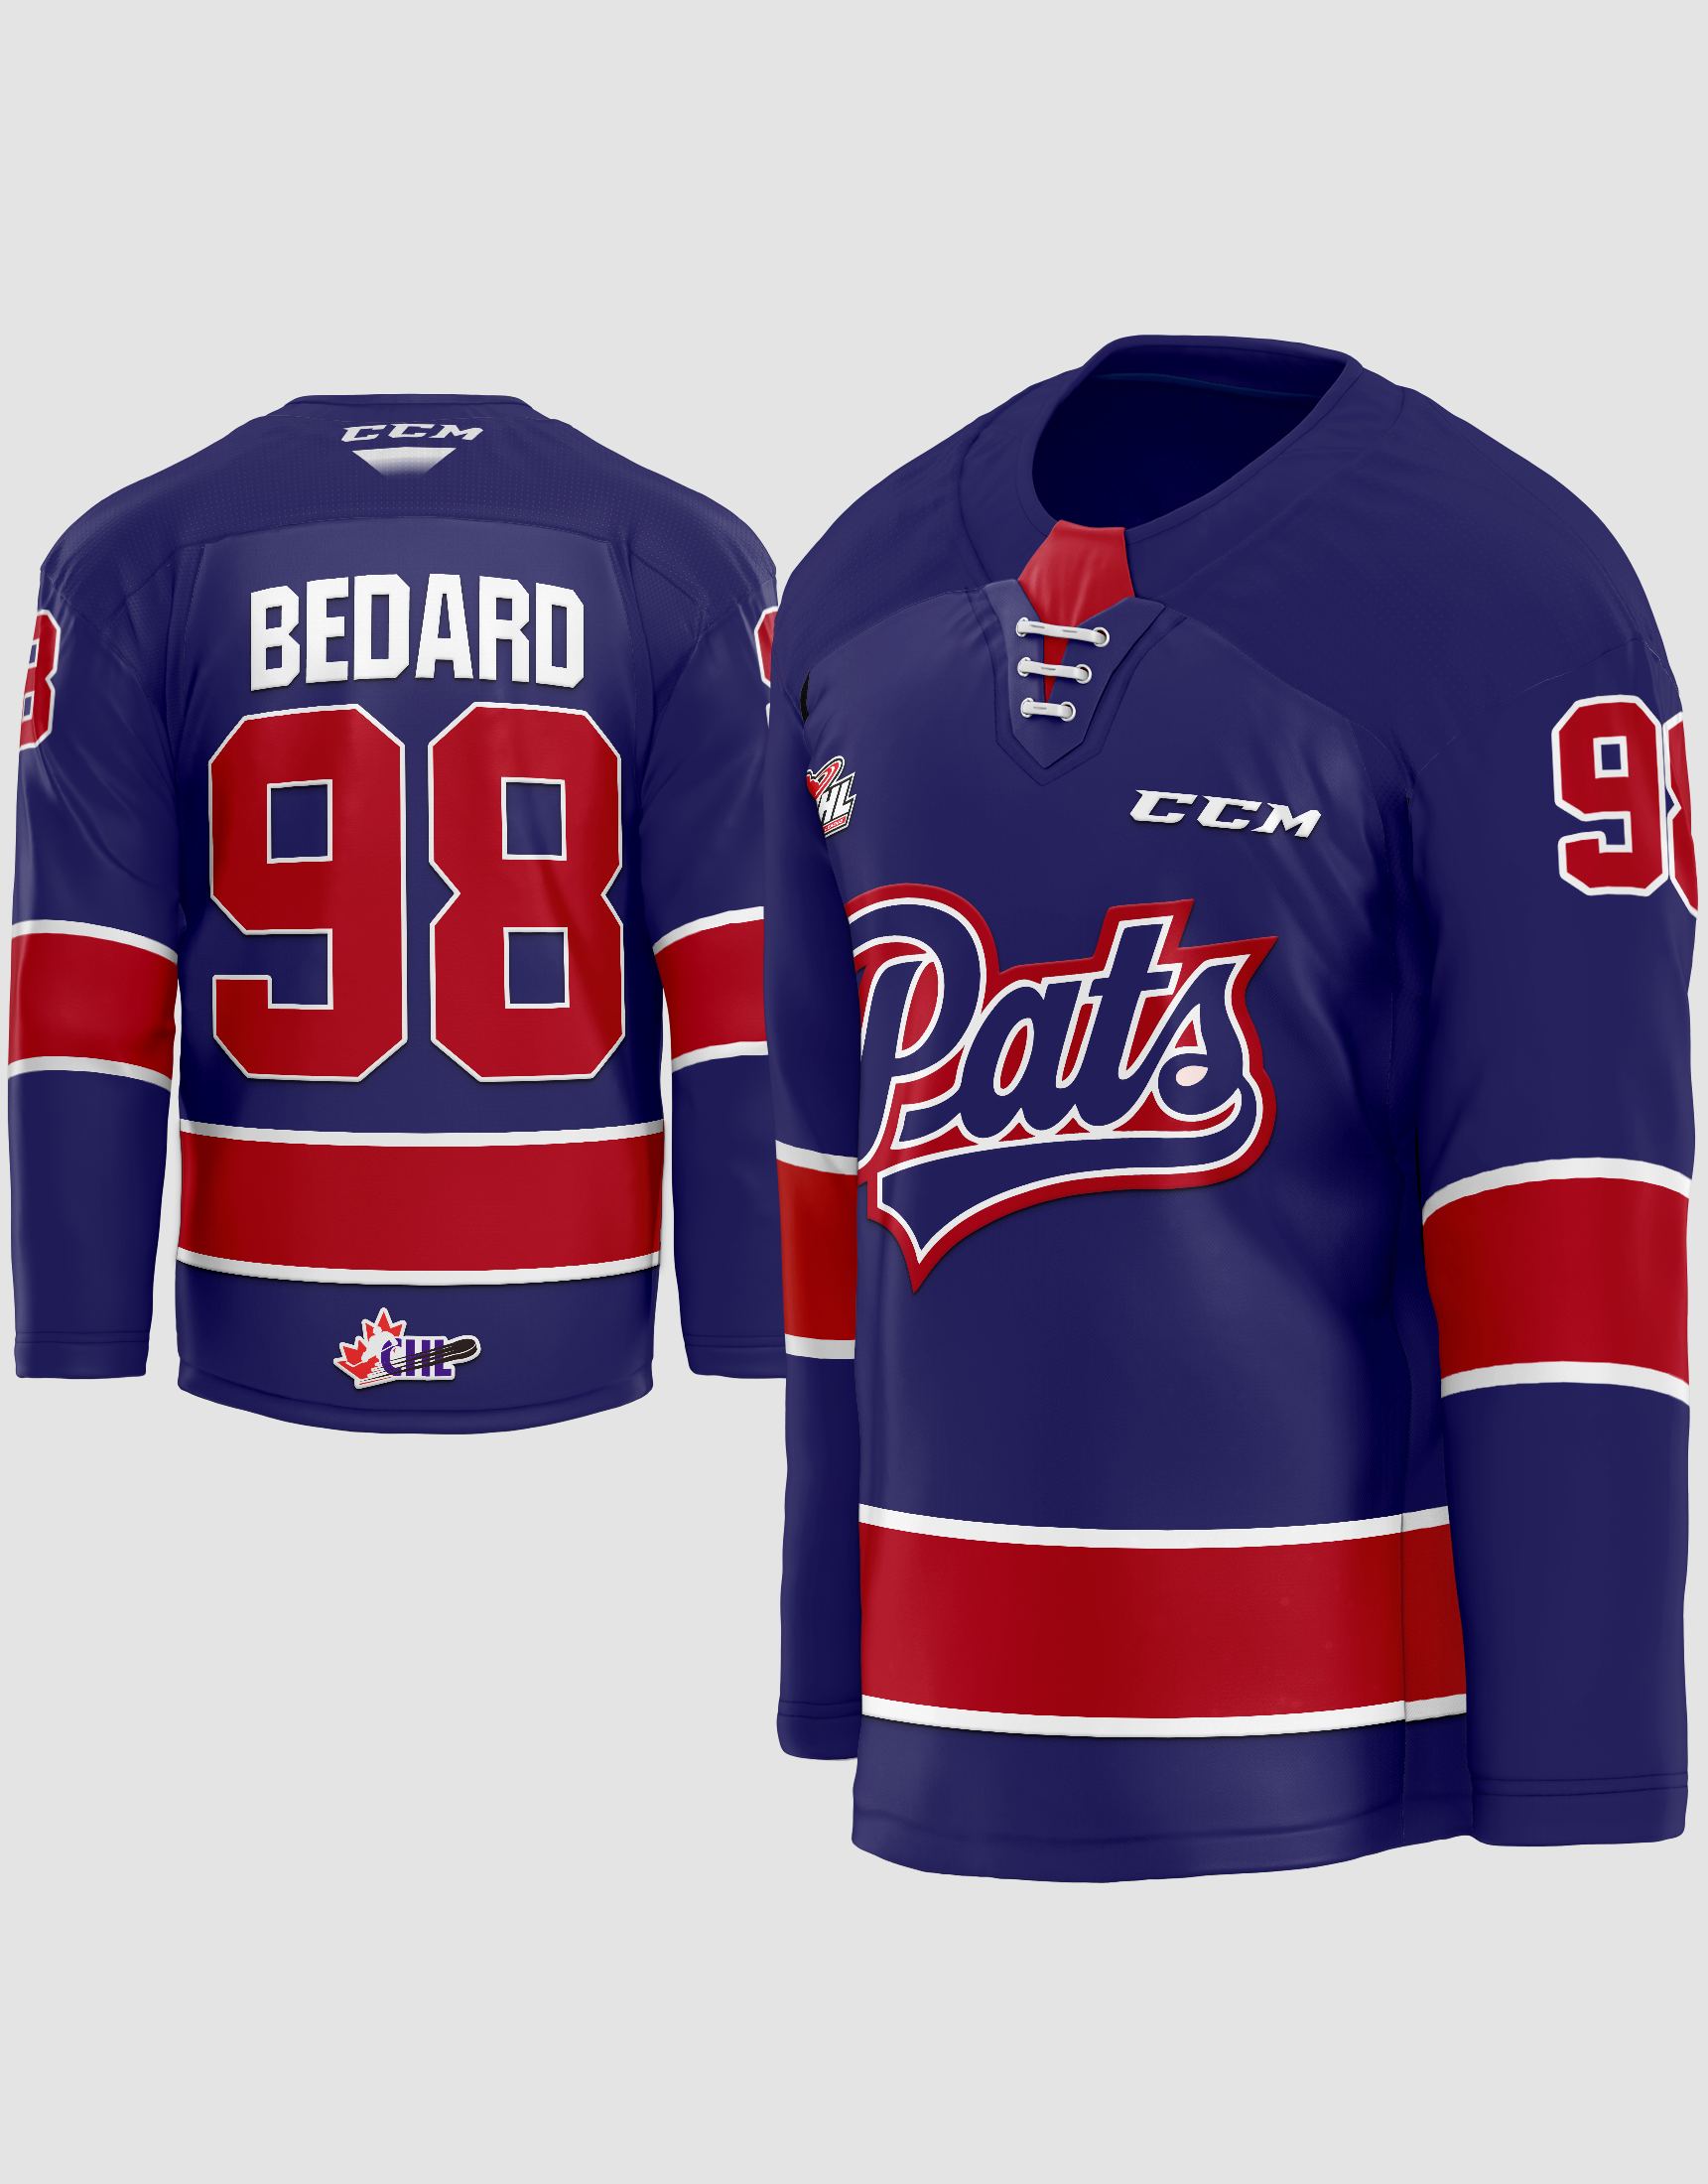 Connor Bedard jerseys are available on NHL website – NBC Sports